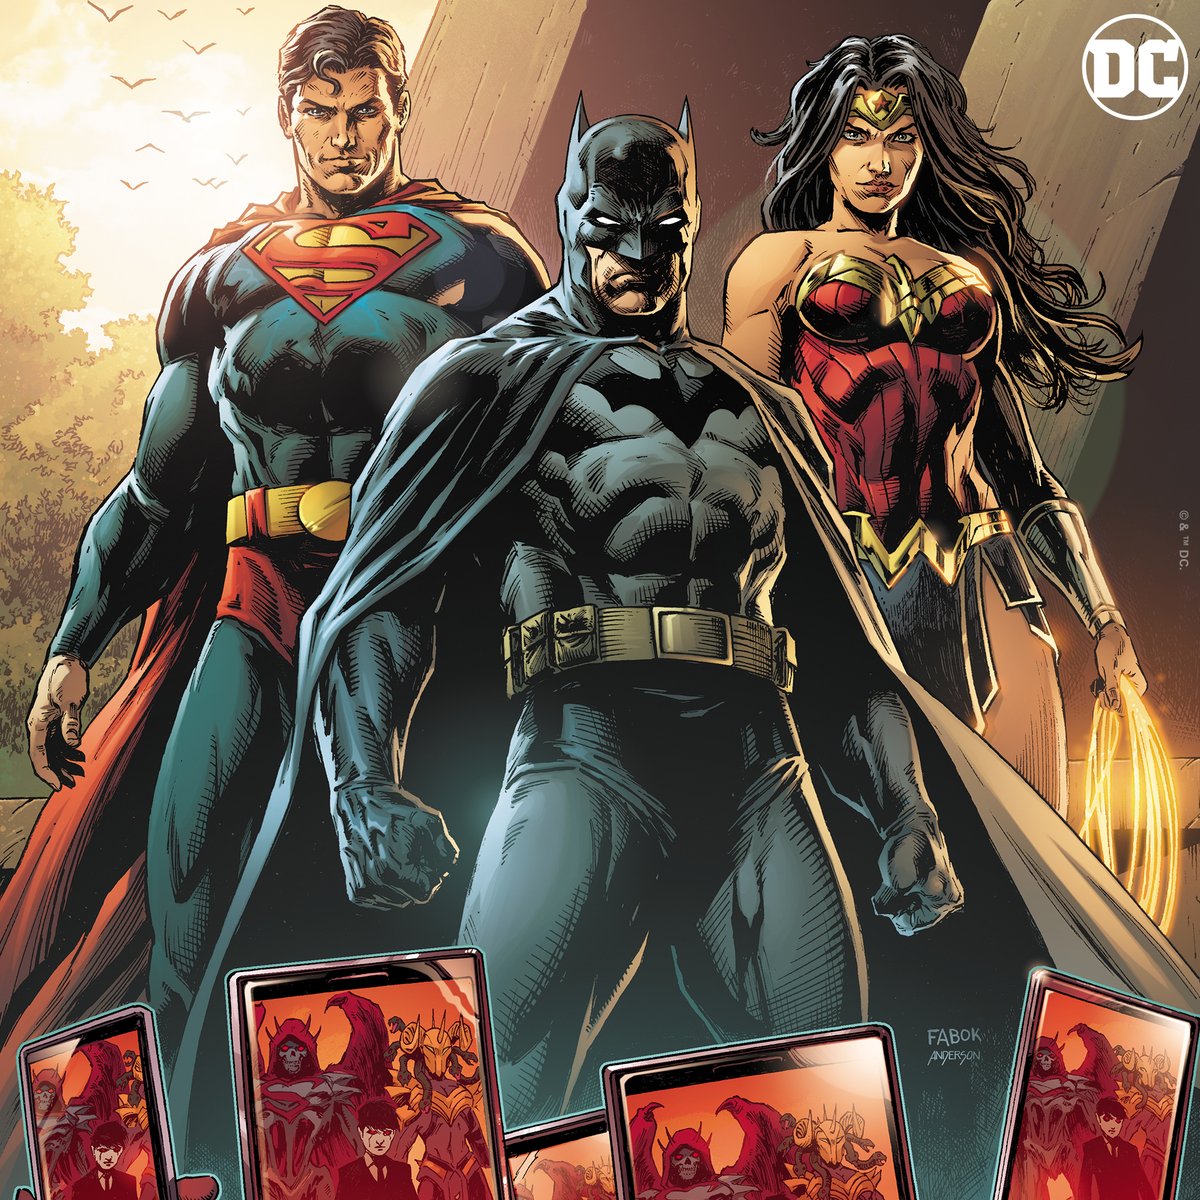 It's not just a dream! Horror devastates the DC Universe this summer, and it all begins with KNIGHT TERRORS FCBD SPECIAL EDITION—available free-to-read on DC UNIVERSE INFINITE now. Start reading now: bit.ly/3nY9uB4